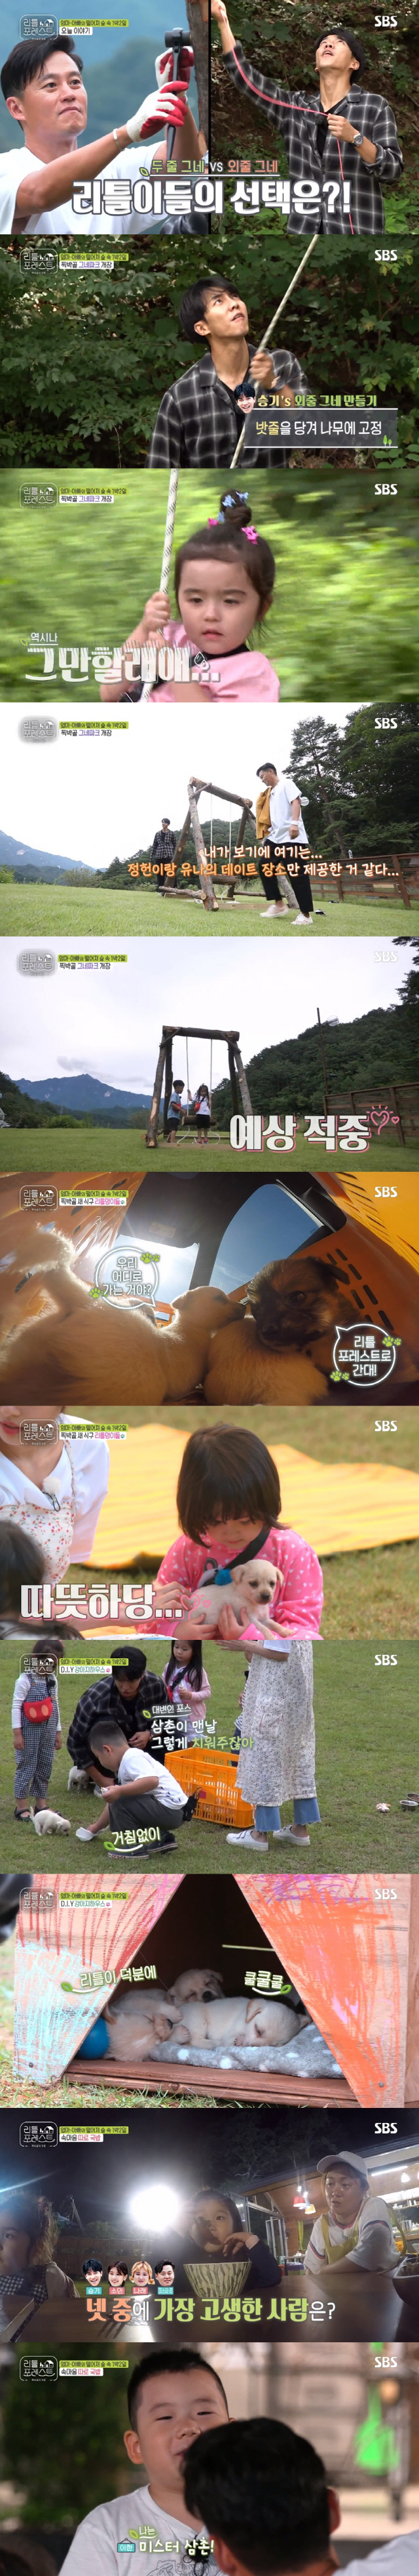 SBS Wolhwa Entertainment Little Forest recorded the highest audience rating of 4.7%.In SBS Little Forest broadcast on the last 30 days, Lee Seung-gi and Lee Seo-jin laughed at the subtle competition.The two men had a statue-dreaming vision of making a swing to present a new experience to Little on this day, and Lee Seung-gi had conceived a dynamic single-string swing.But Lee Seo-jin was anxious, saying, Is not the outer swing a bit dangerous?After the single-line swing was completed, Lee was satisfied with the swing rising high, but Brooke and Grace were only interested for a while and asked to drop it down saying I will stop.Lee Seung-gi said, No, if you make it like this, you do not have 10 minutes.Lee Seo-jin began to make two safe line swings: after a much more complex production process than the single line swing, the swing was completed, but the reality was the nojam swing.Lee Seo-jin predicted, This seems to have provided only Jung Heon and Yunas dating places here, and this expectation hit.Littles then challenged the puppy care; Littles, who had been on a mission to care for their newborn babies in their neighborhood, went to see the puppy in anticipation.After bringing Puppy home, and with Jung So-min Park Na-rae, he was immersed in caring for Puppy, making a house for Puppy and feeding milk.Lee Han-yi showed an adult appearance to remove the puppys feces and was appointed as a deputy to Lee Seung-gi.Jung So-min, who saw this, said, The children are too small and fragile, and I feel warm because I think that I have to protect the weaker puppy than them.I expressed my feelings.The competition between Lee Seo-jin and Lee Seung-gi, which ended in a draw in swing making, led to aunts and Lee Han-is Choices.While making lunch for Little, Park Na-rae told Jung So-min, Do you think it would be nice if Lee Seung-gi or Lee Seo-jin were Father?I asked, and both replied, Seojin Father! at the same time.Jung So-min said, I like grazing, he said. I want to live with the winner Father until the age of 13, and then Seojin Father.Lee Han-yi also picked Mr Lee The Uncle, which always made delicious food, when asked Who seems to have suffered the most among the Uncle aunts?Lee Seo-jin said, I will give you a full time. Lee Seung-gi, who did not receive Choices, laughed at Lee Han-yi.On the other hand, at the end of the broadcast, the members preparing for the last care were drawn.Lee Seung-gi brought an egg hatchet, and Park Na-rae prepared to play a large soap bubble and be fascinated by Little.Lee Seo-jin was in a situation where he had to go to see the first little girl and the mart. Lee Seo-jin said, I am awkward when I have two nieces!, and this scene was the best one minute with a 4.7% audience rating.SBS Little Forest is broadcast every Monday and Tuesday at 10 pm.